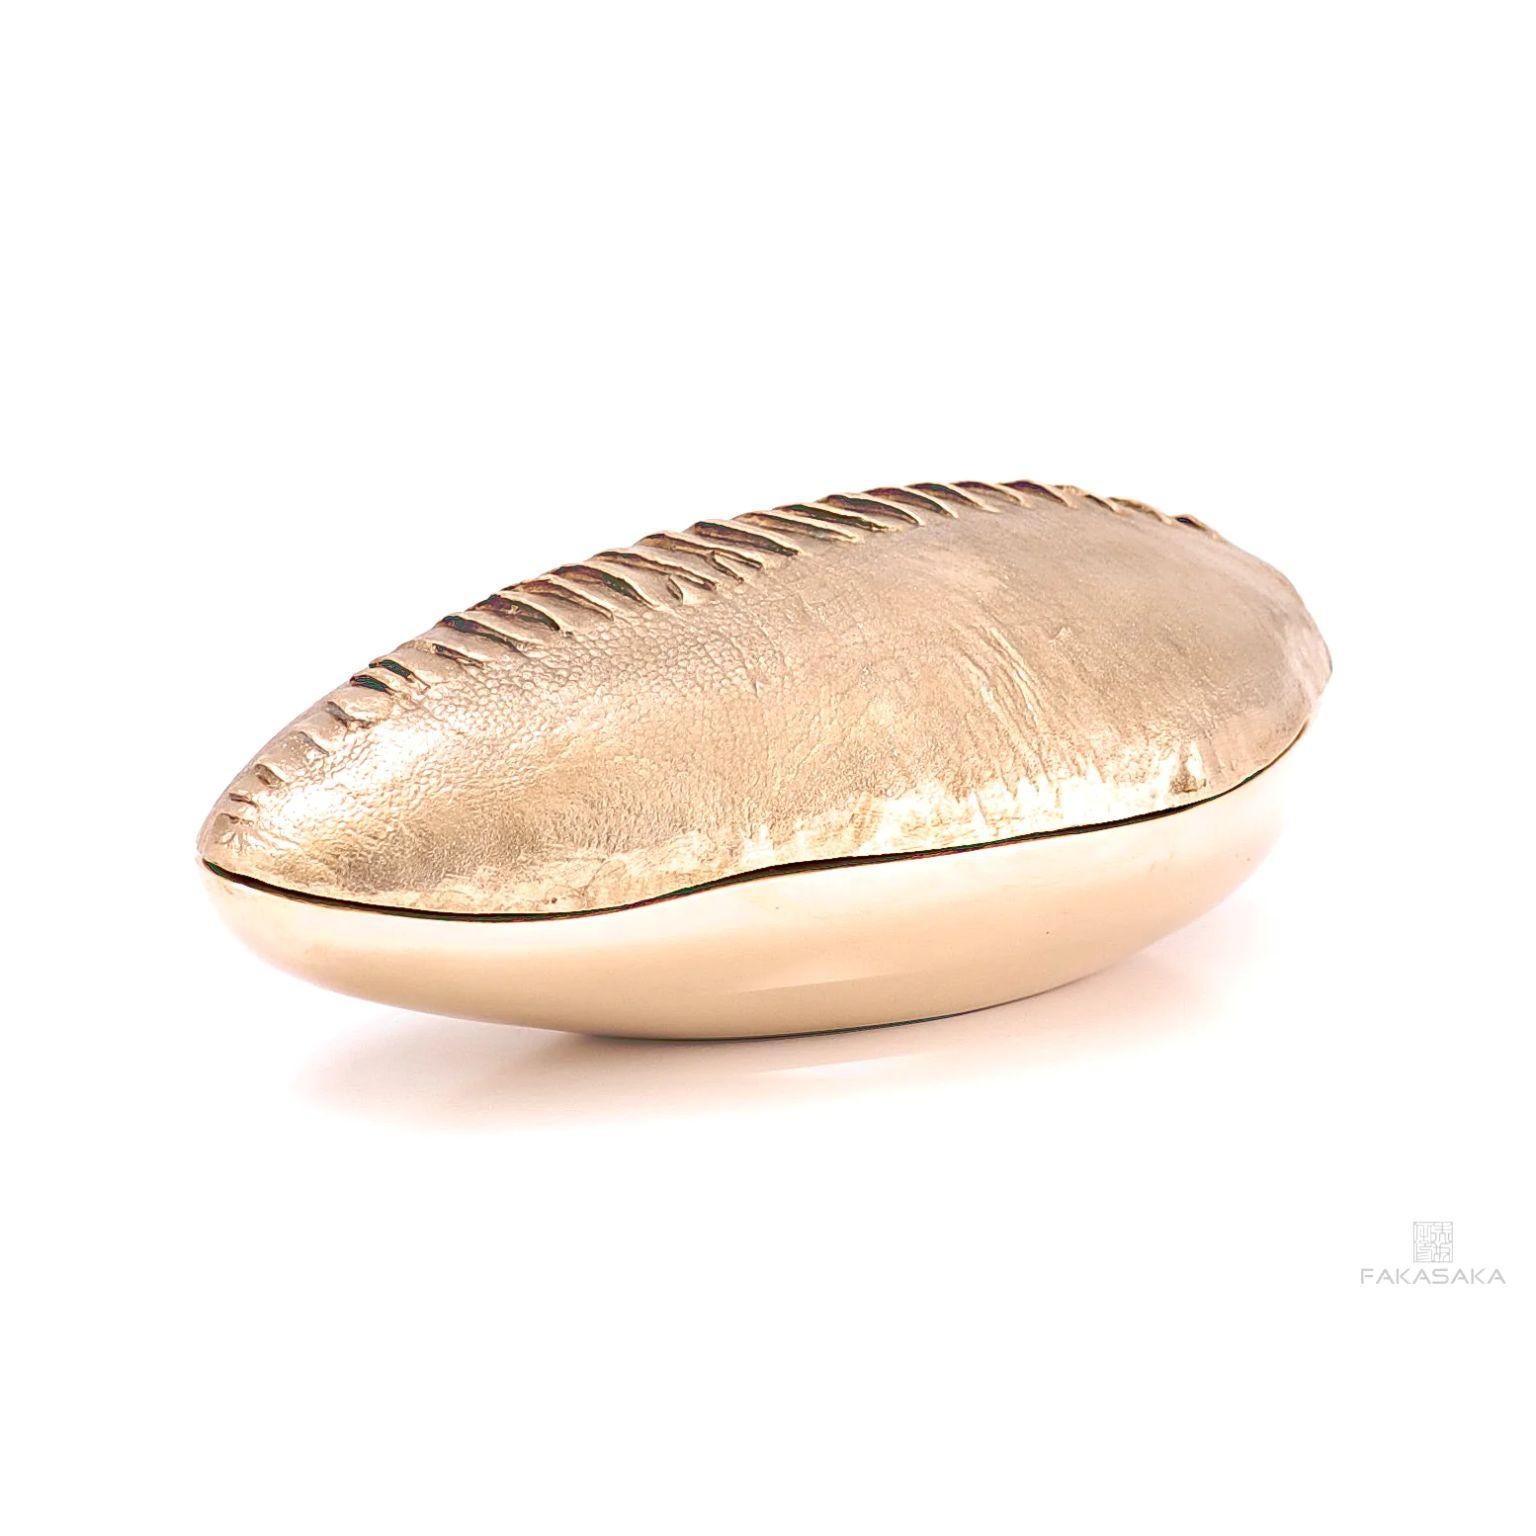 Other Pearl Box by Fakasaka Design For Sale